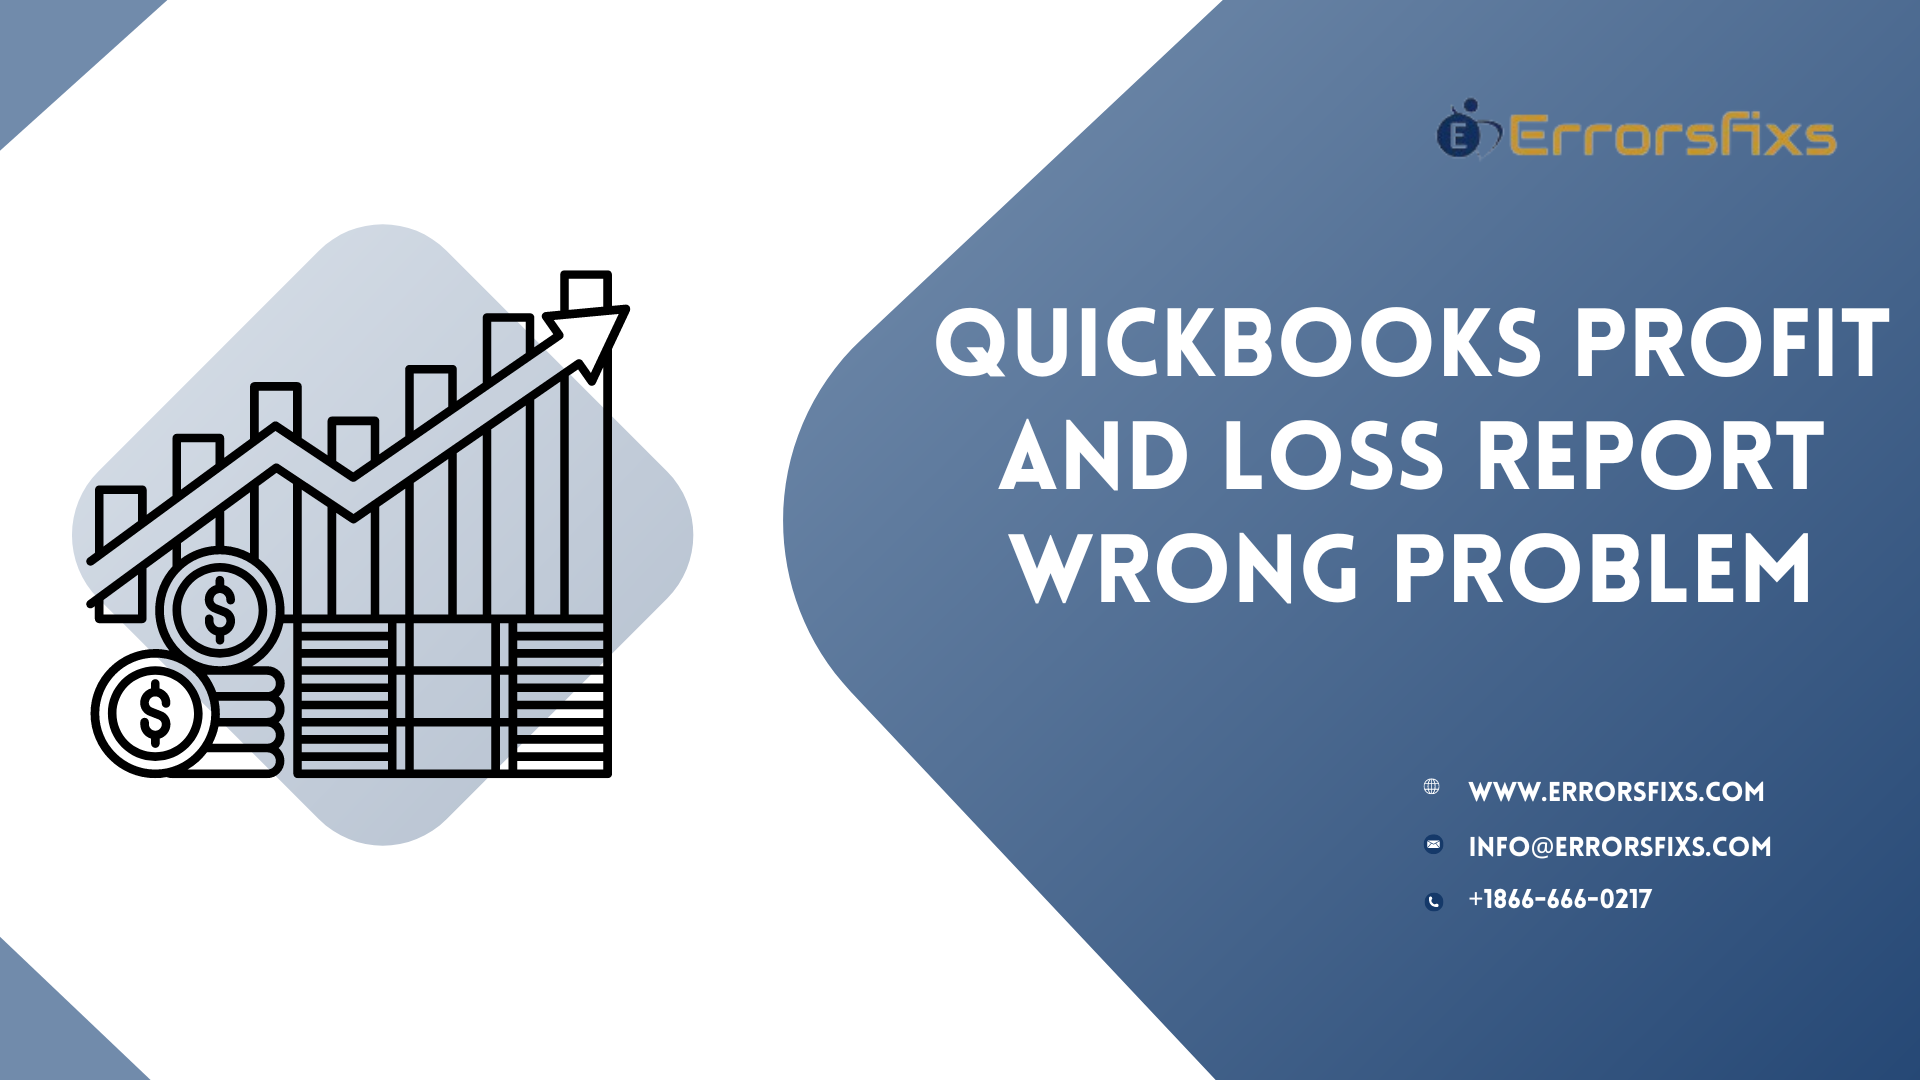 QuickBooks Profit and Loss Report Wrong Problem - Charlotte Computer